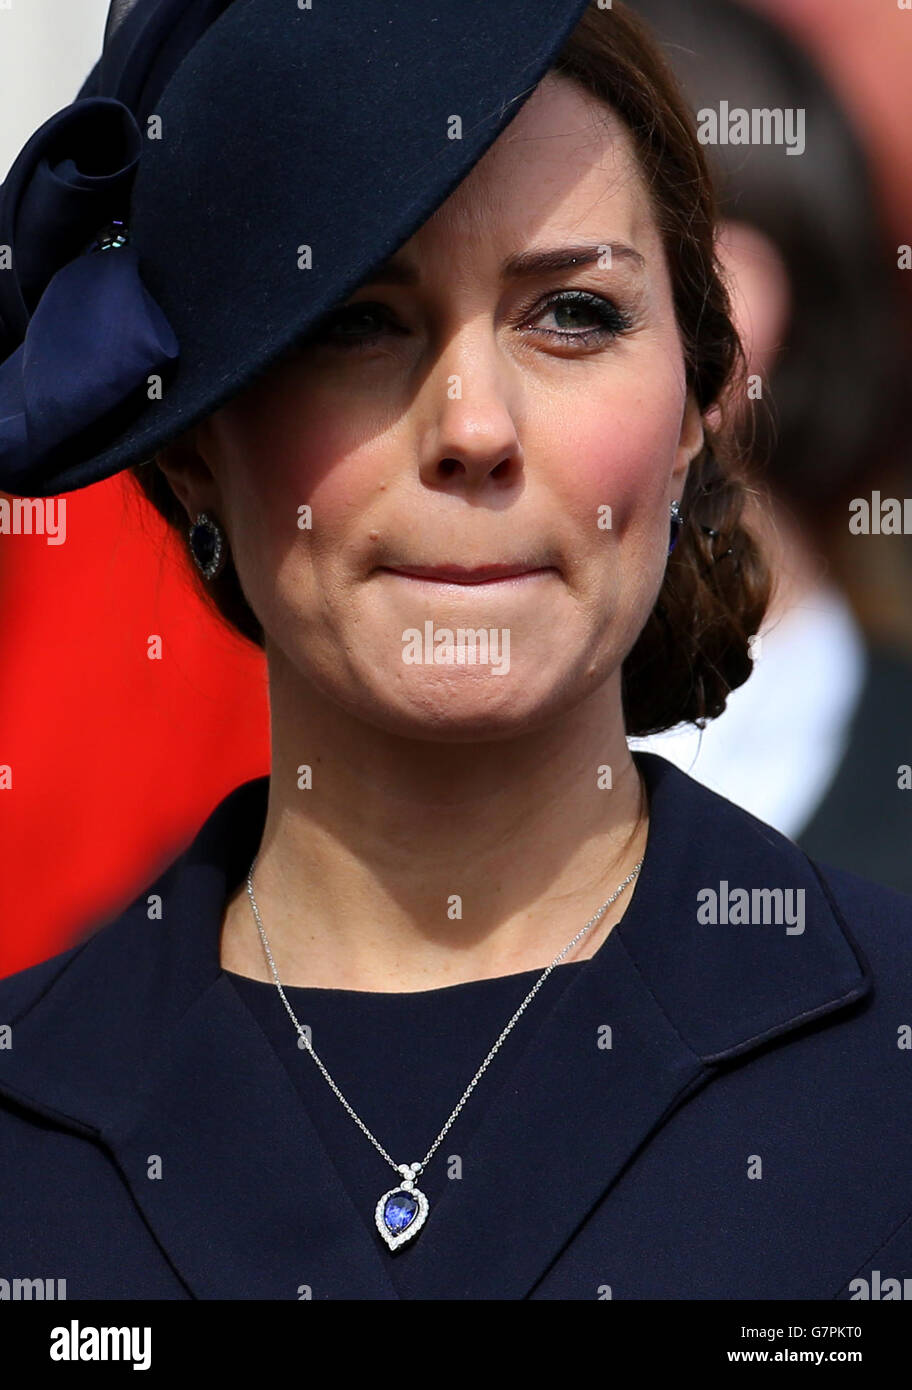 The Duchess of Cambridge watches the military parades following a commemoration service to mark the end of combat operations in Afghanistan at St Paul's Cathedral, London. Stock Photo